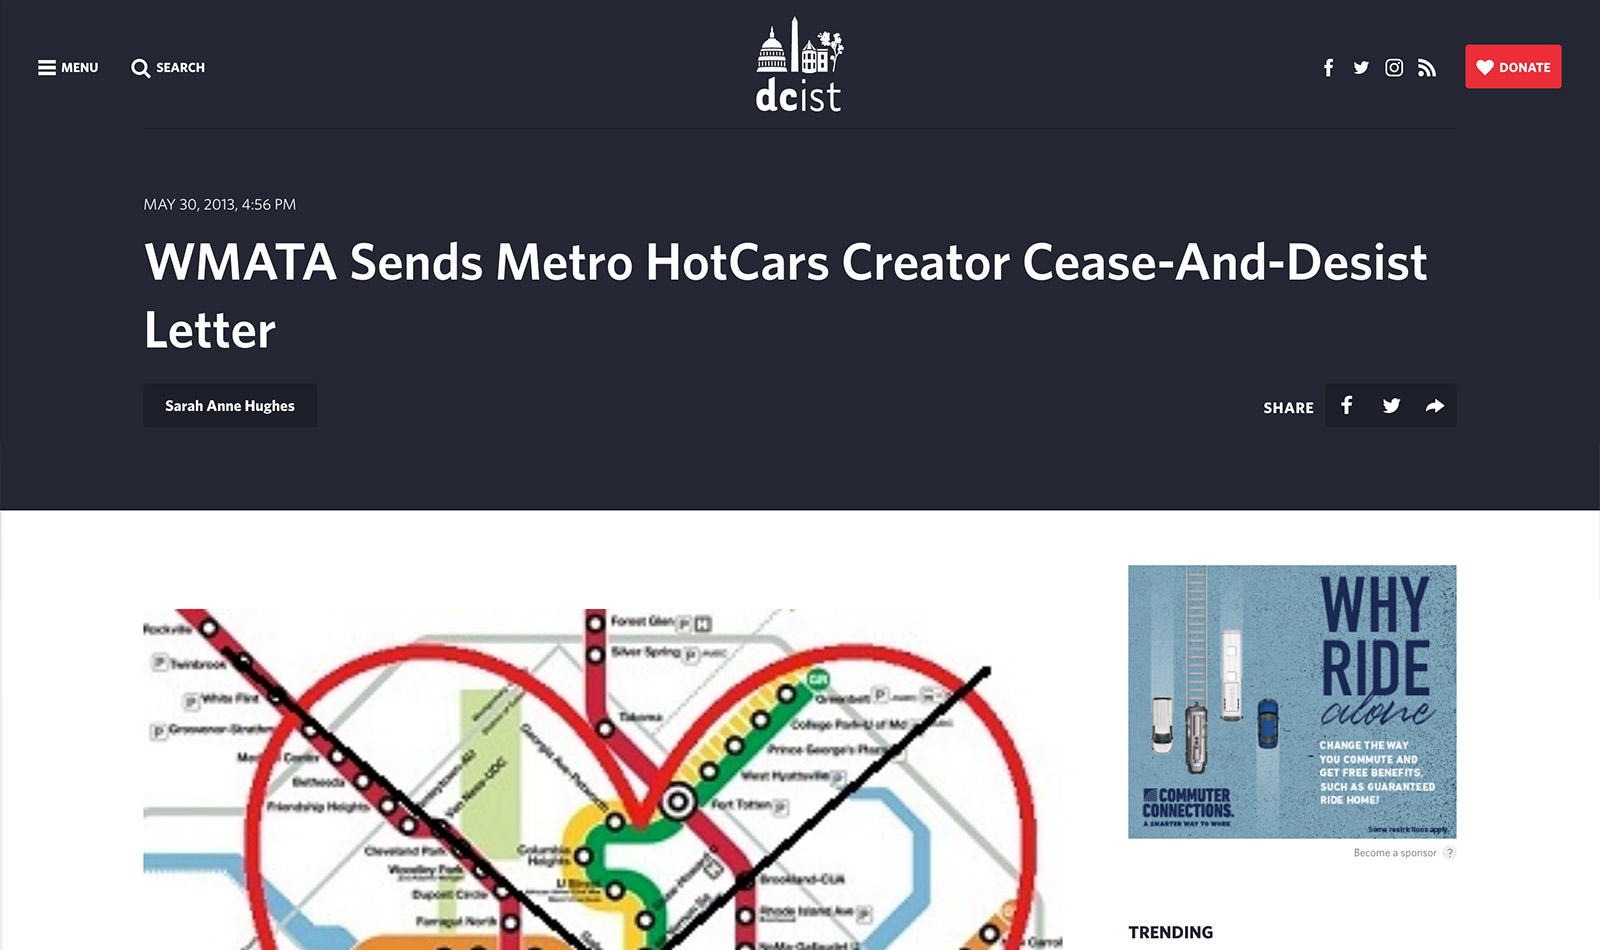 DCist coverage of the Metro HotCars site: "WMATA Sends Metro HotCars Creator Cease-And-Desist Letter"